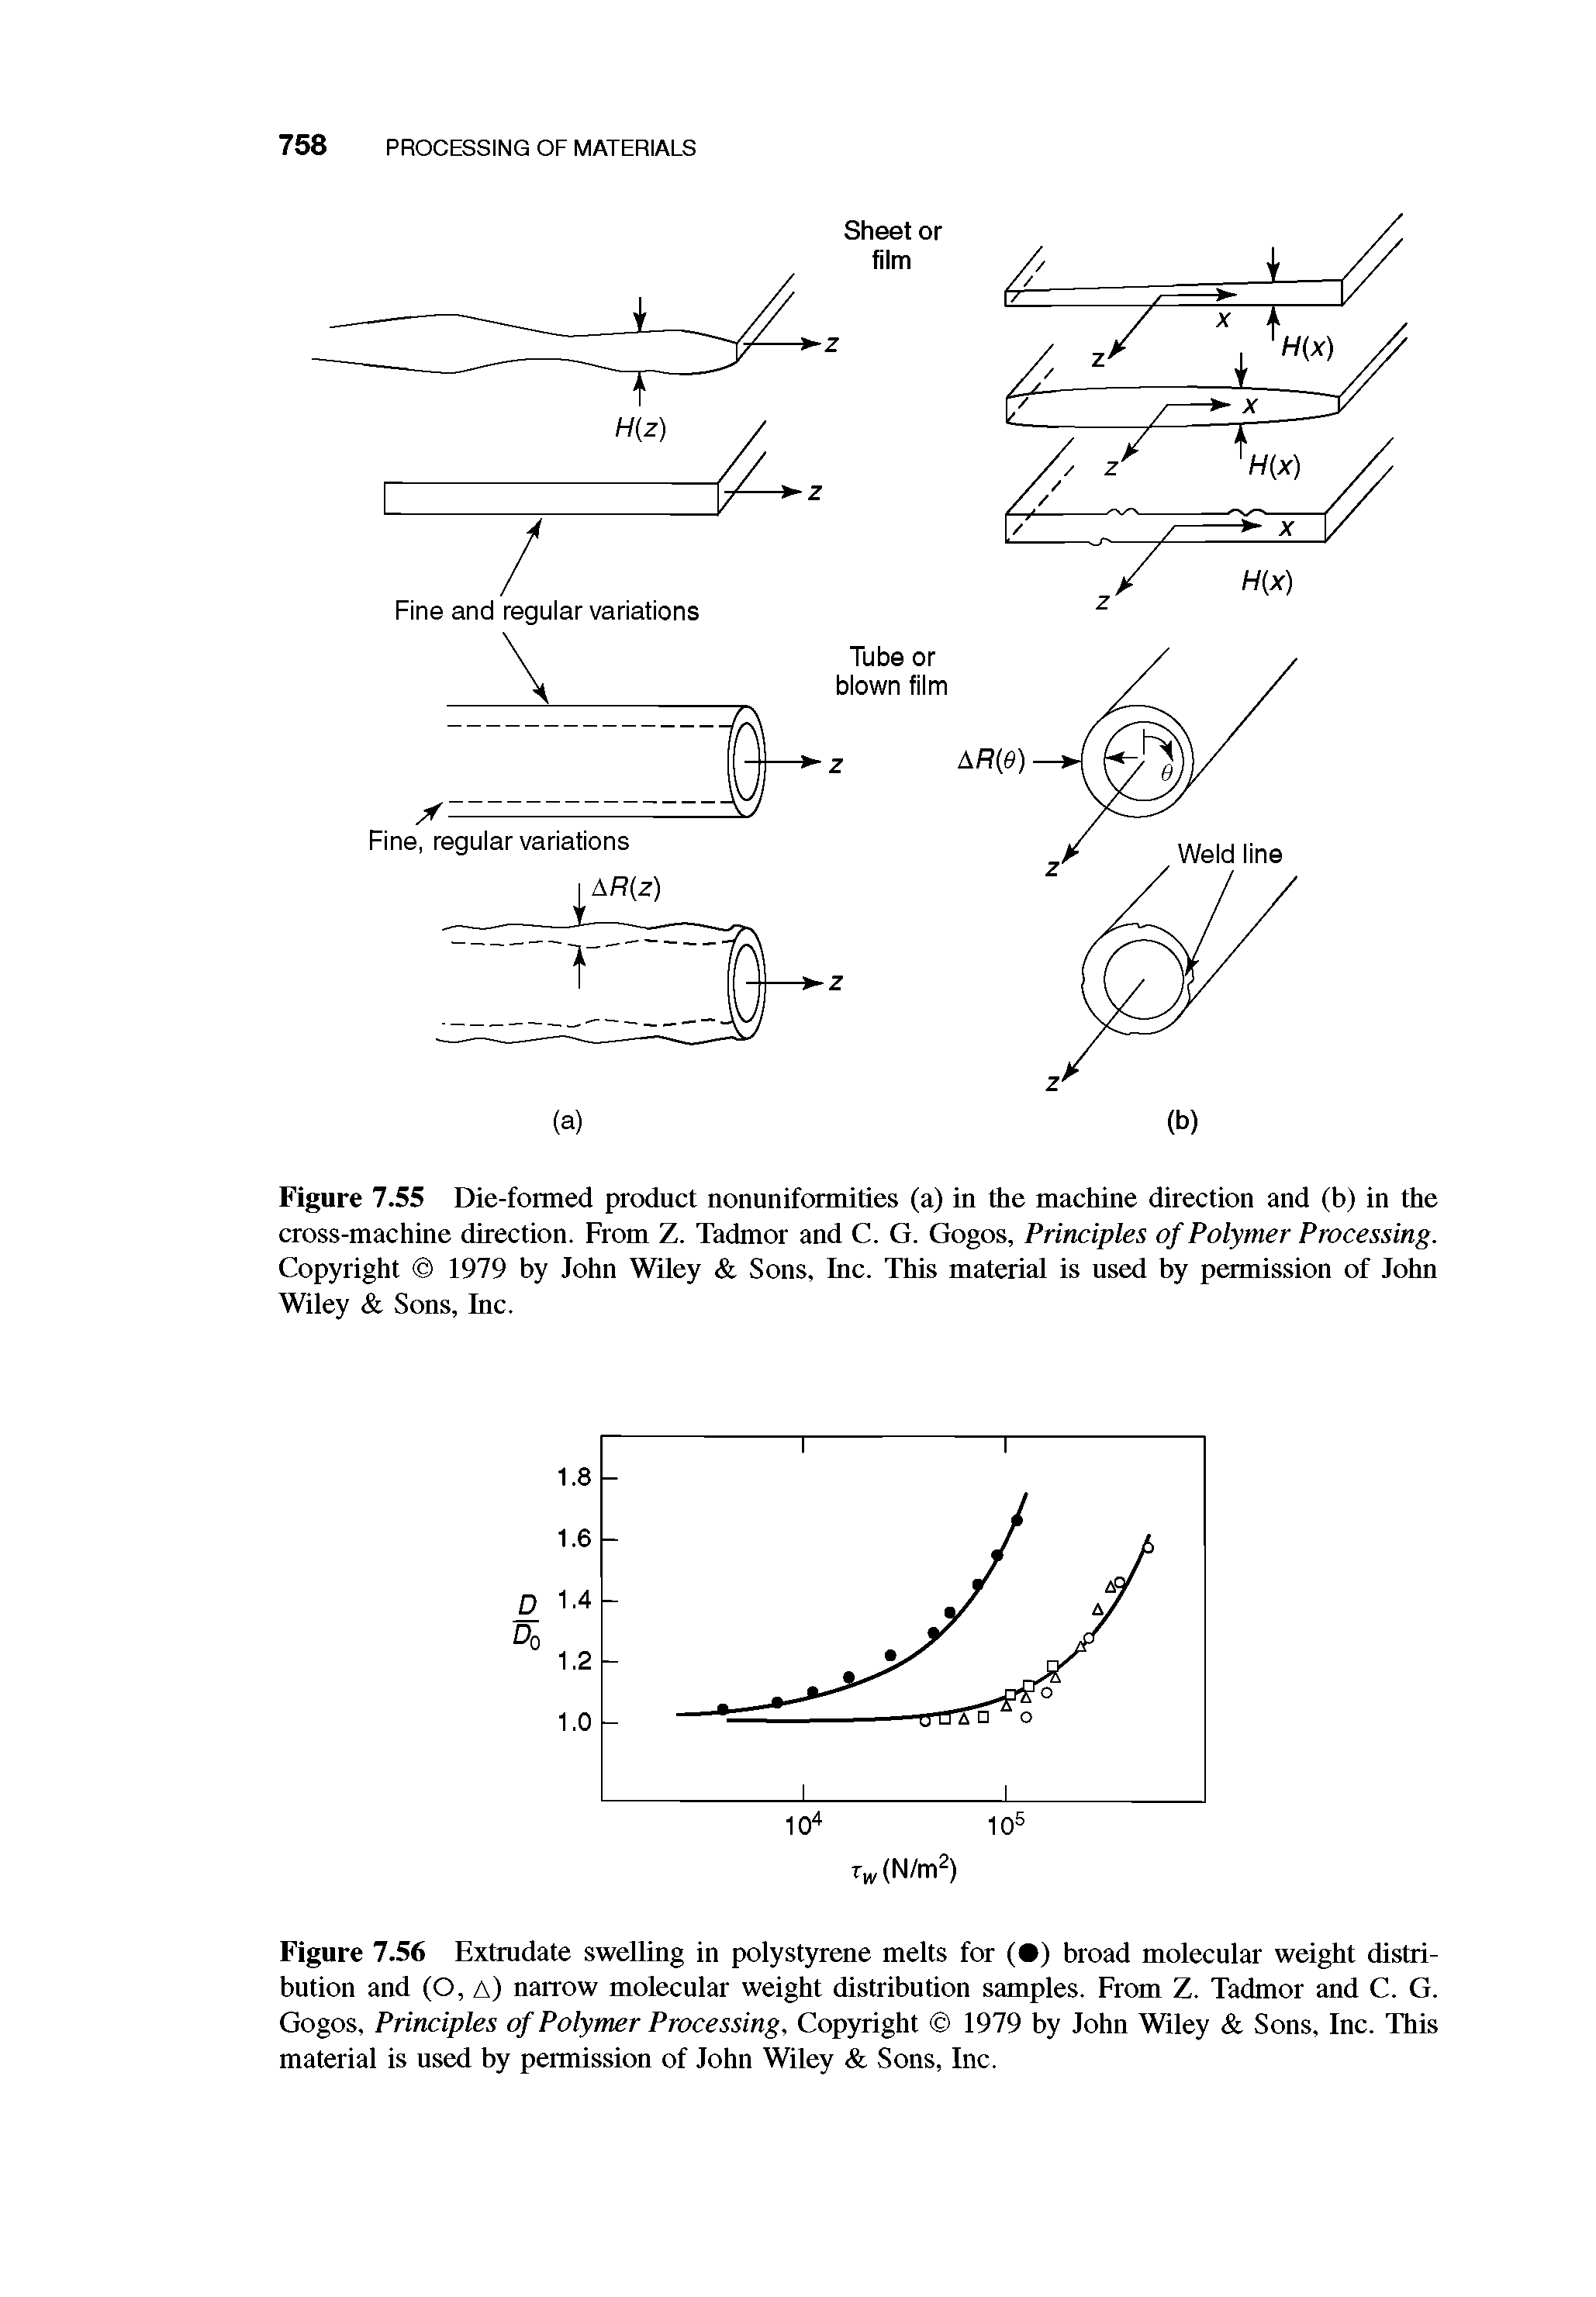 Figure 7.56 Extrudate swelling in polystyrene melts for ( ) broad molecular weight distribution and (O, a) narrow molecular weight distribution samples. From Z. Tadmor and C. G. Gogos, Principles of Polymer Processing, Copyright 1979 by John Wiley Sons, Inc. This material is used by permission of John Wiley Sons, Inc.